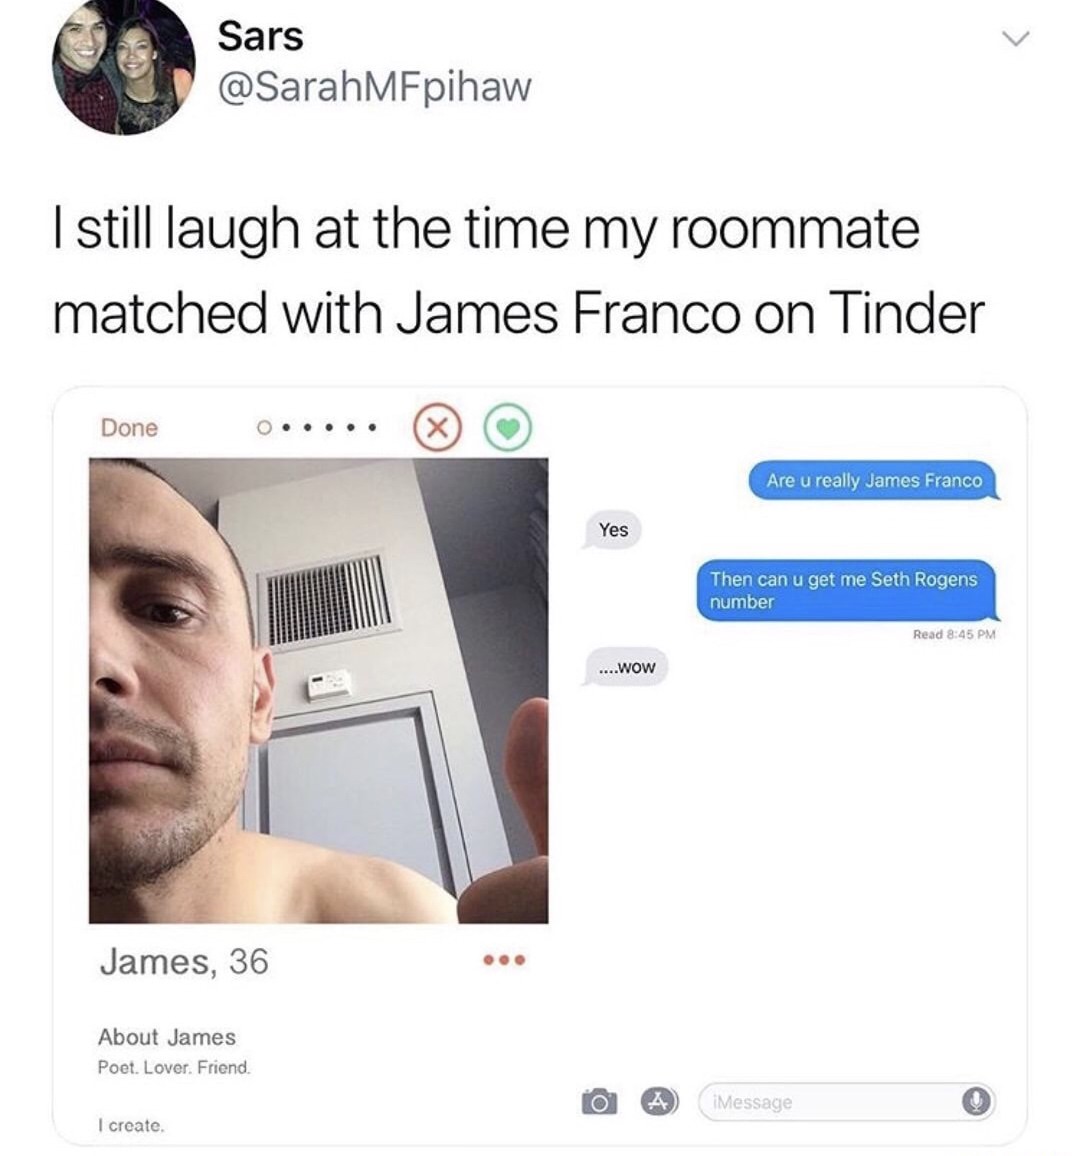 pineapple express memes - Sars I still laugh at the time my roommate matched with James Franco on Tinder Done Donec ..... Are u really James Franco Yes Then can u get me Seth Rogens number Read ...Wow James, 36 About James Poet. Lover. Friend To & iMessag